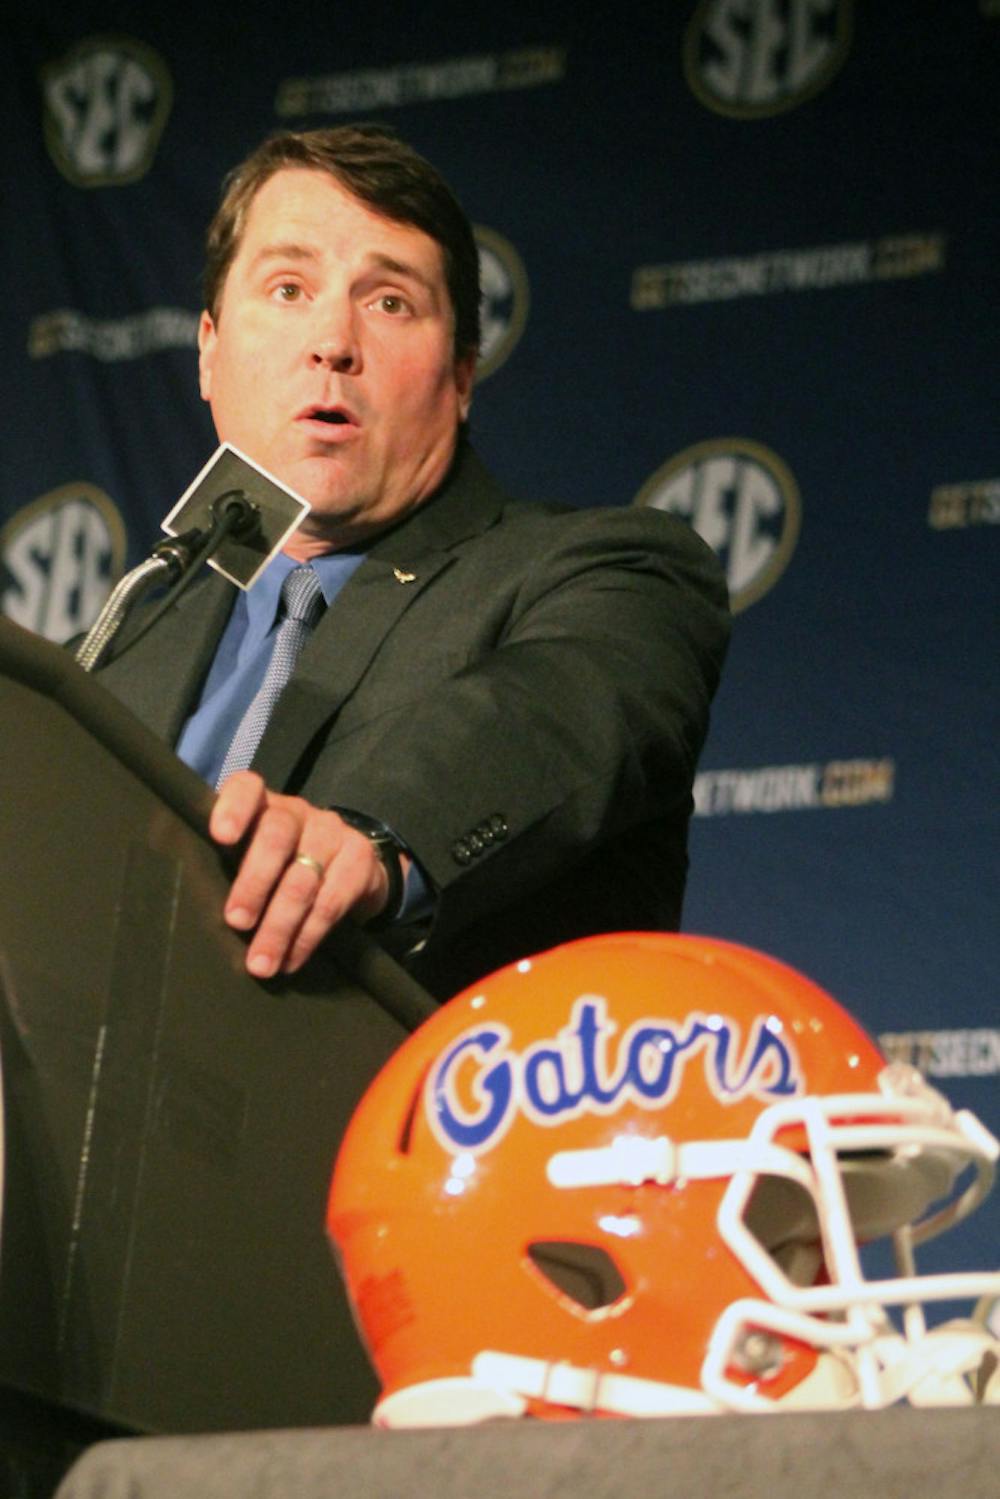 <p>UF coach Will Muschamp speaks during the Southeastern Conference Media Days in Hoover, Ala., on July 14.</p>